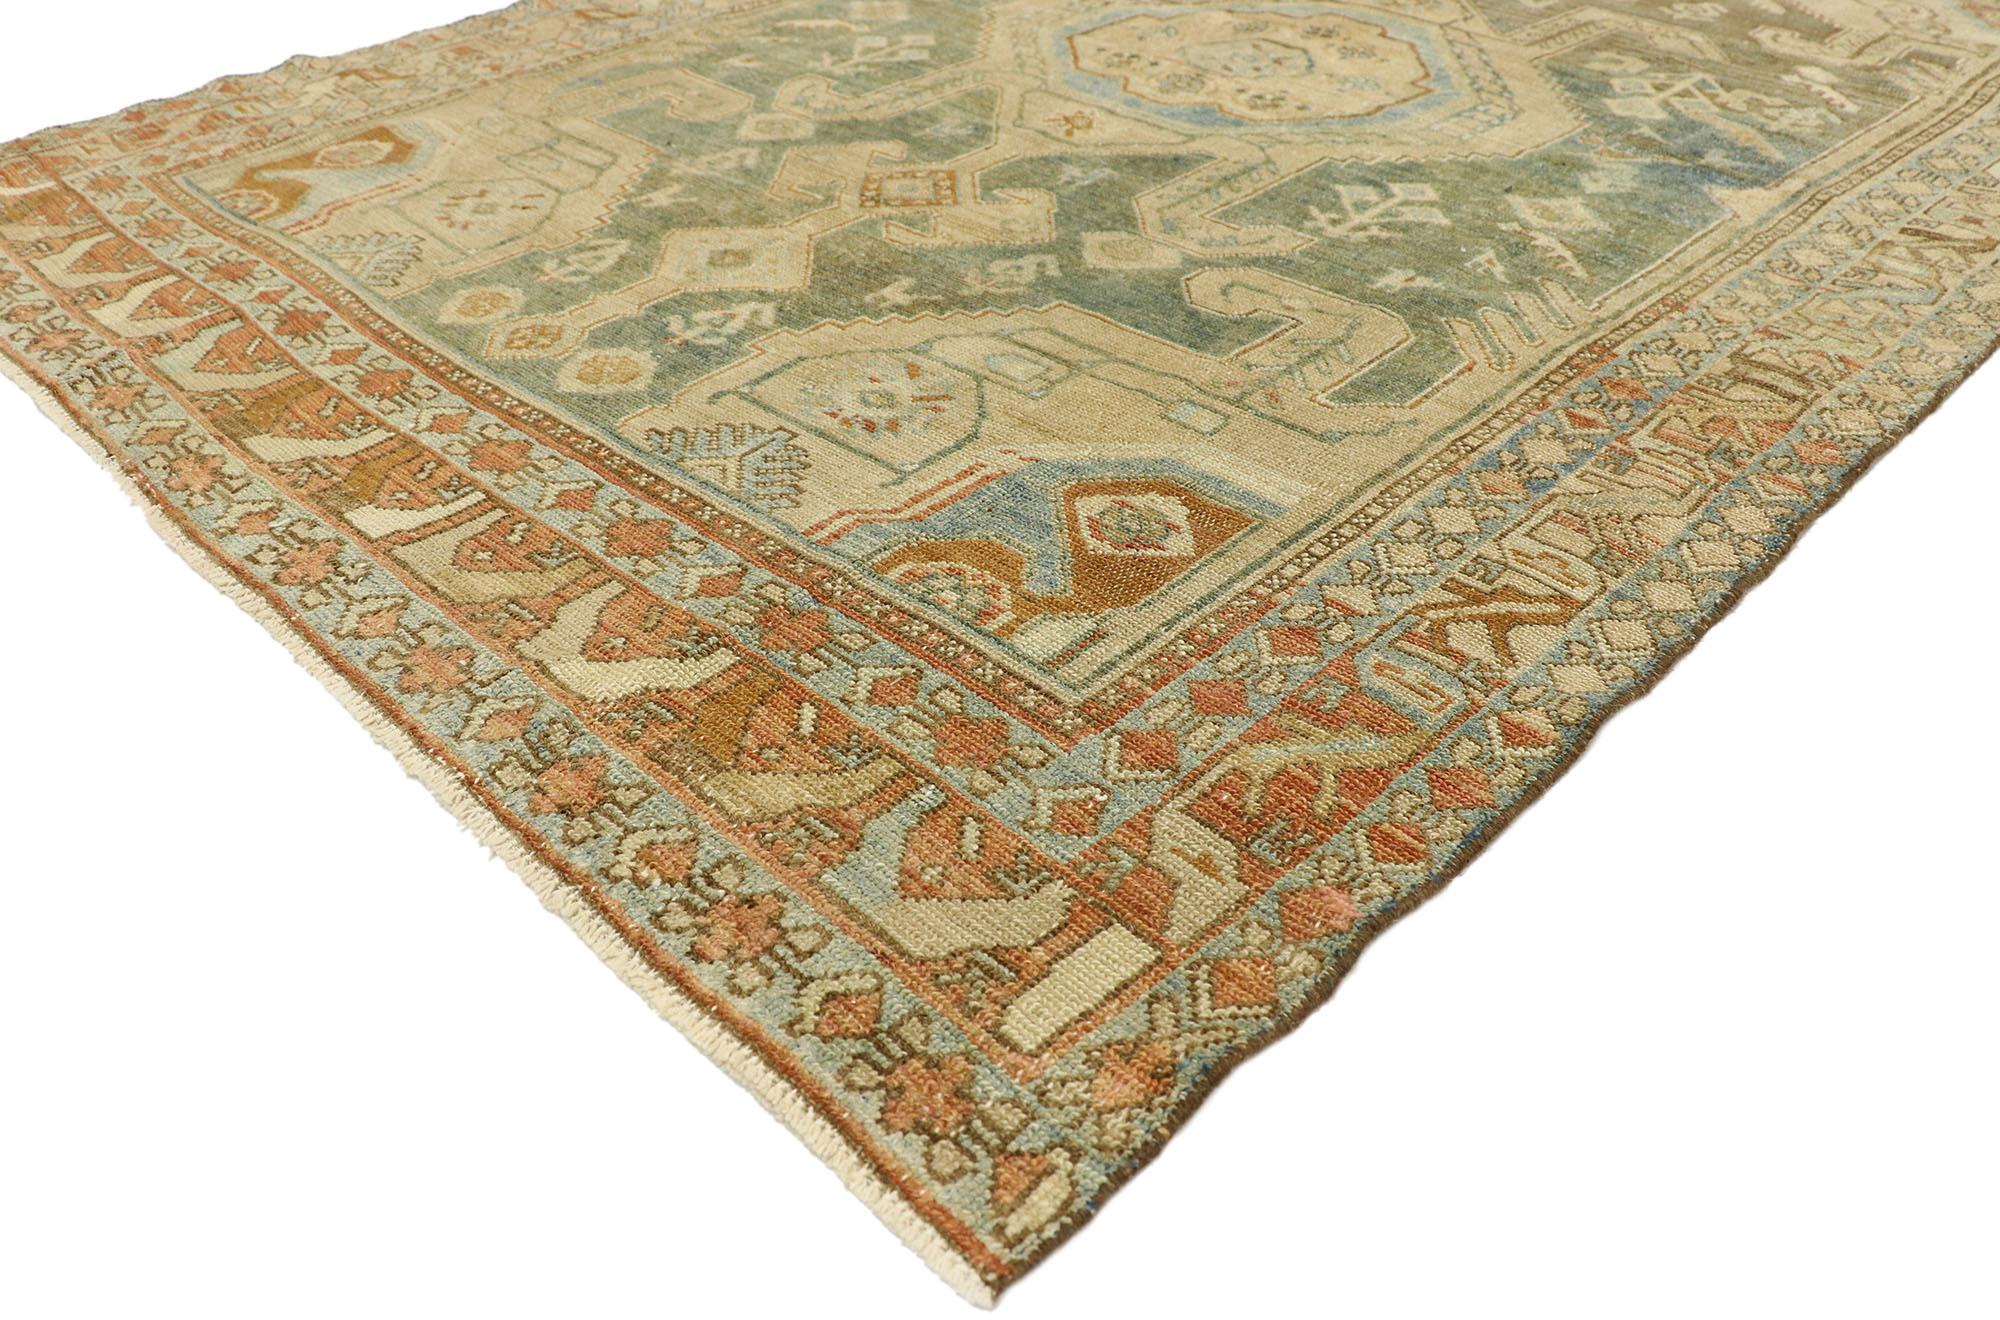 52842, Distressed Antique Persian Malayer Rug with Arts & Crafts Rustic Style 04'08 x 06'08. Balancing traditional sensibility and tribal design elements with nostalgic charm, this hand knotted wool distressed antique Persian Malayer rug can